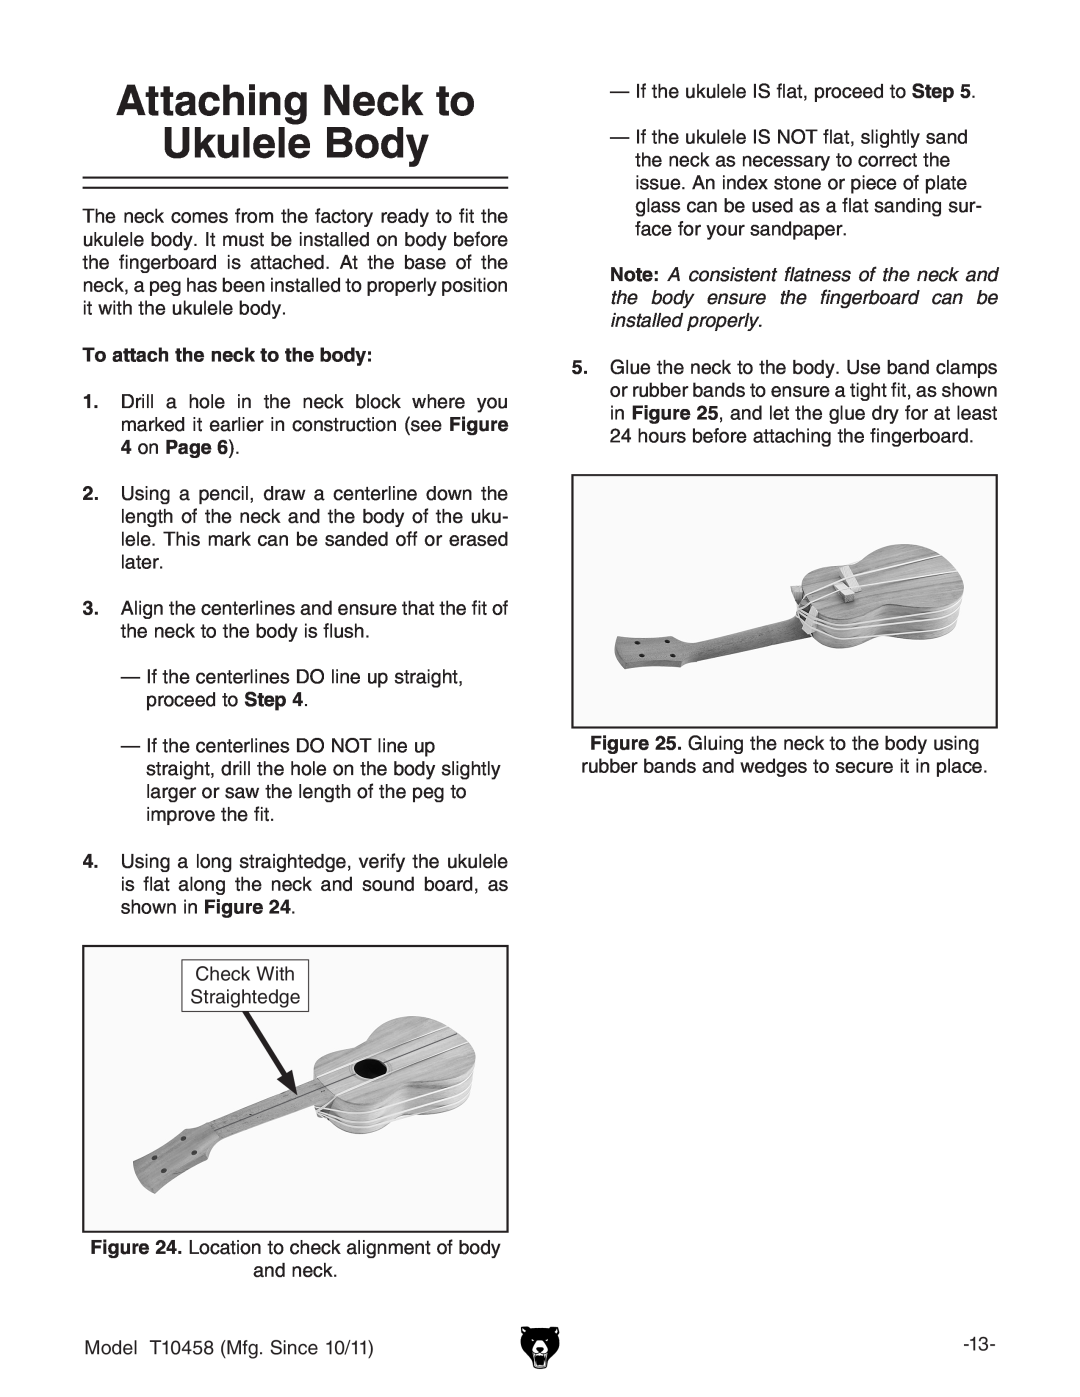 Grizzly T10458 instruction manual Attaching Neck to Ukulele Body, To attach the neck to the body 